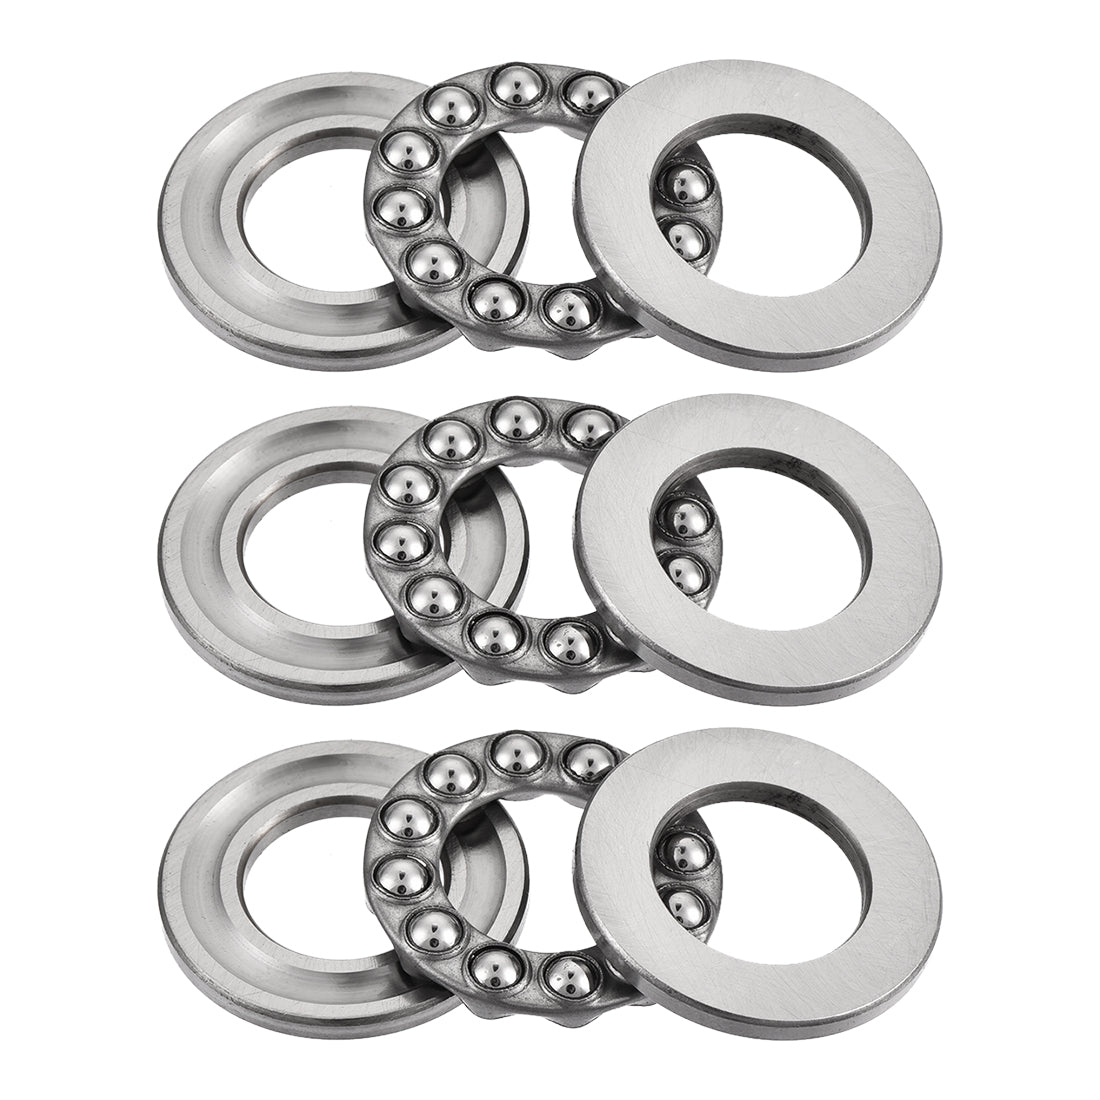 uxcell Uxcell Thrust Ball Bearings Chrome Steel Single Directions Steel Cage